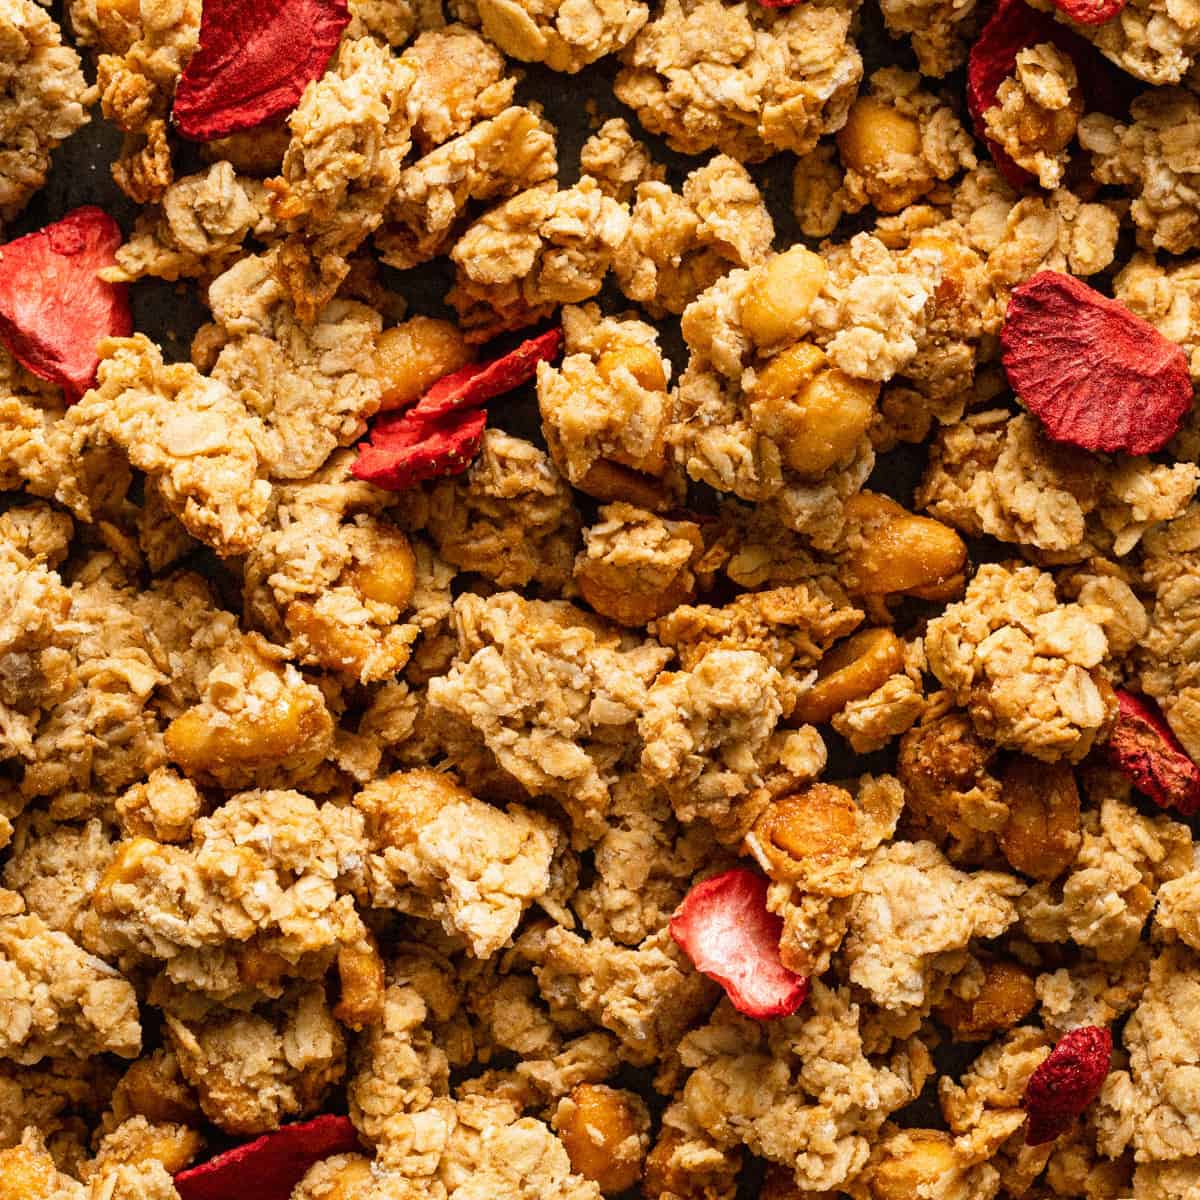 A baking sheet of peanut butter granola showing the peanuts and freeze dried strawberries.